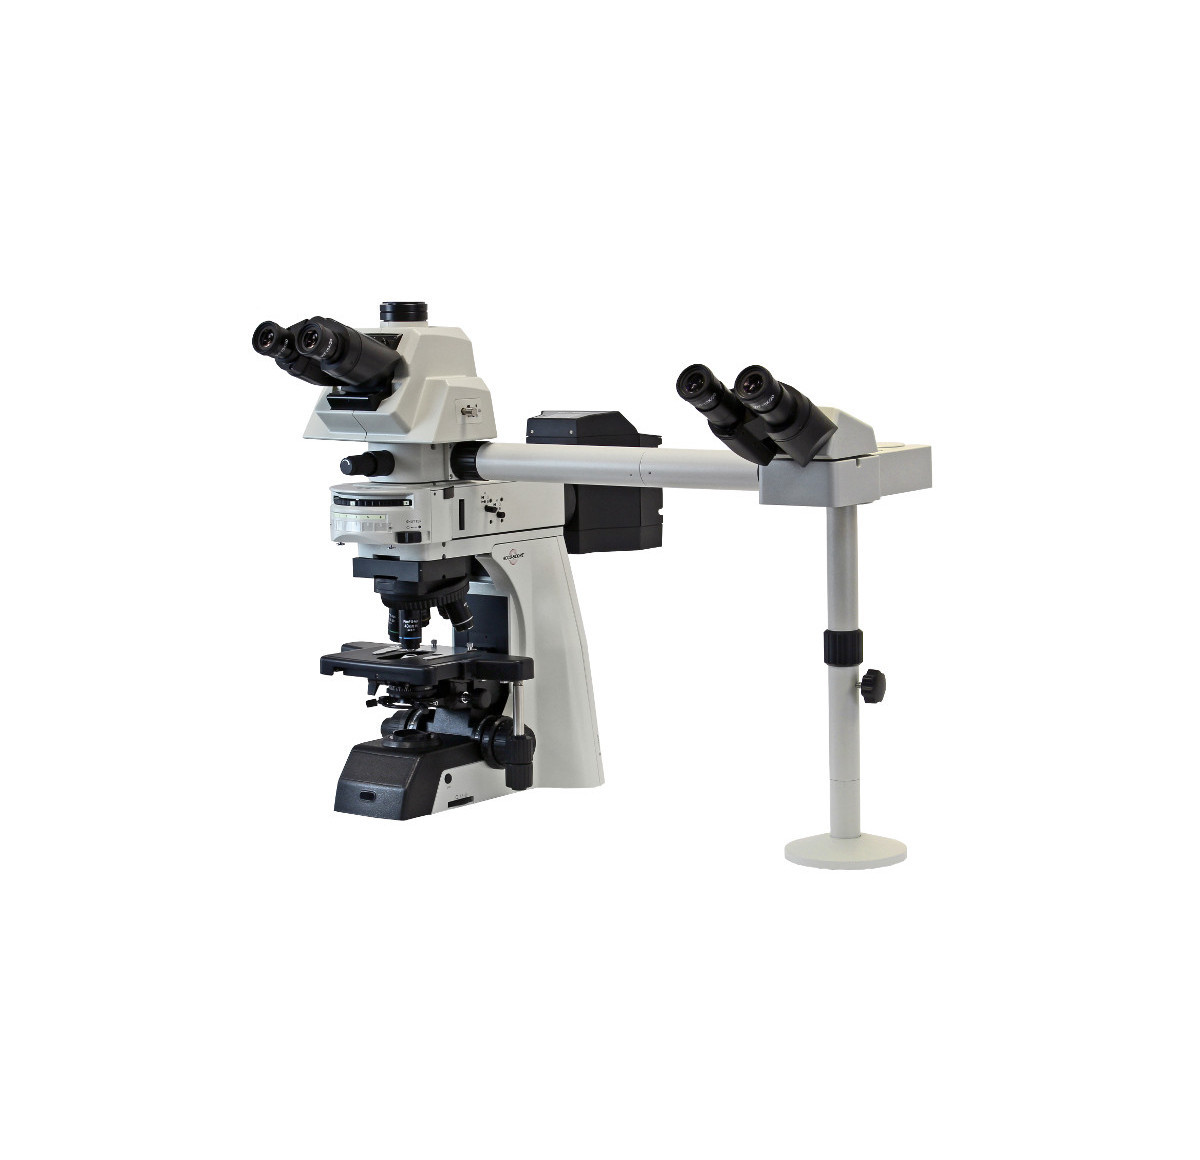 500-2SBS Dual Observer Accessory shown on EXC-500 with 6-position Fluorescence Illuminator, optional Viewing Head and Eyepieces